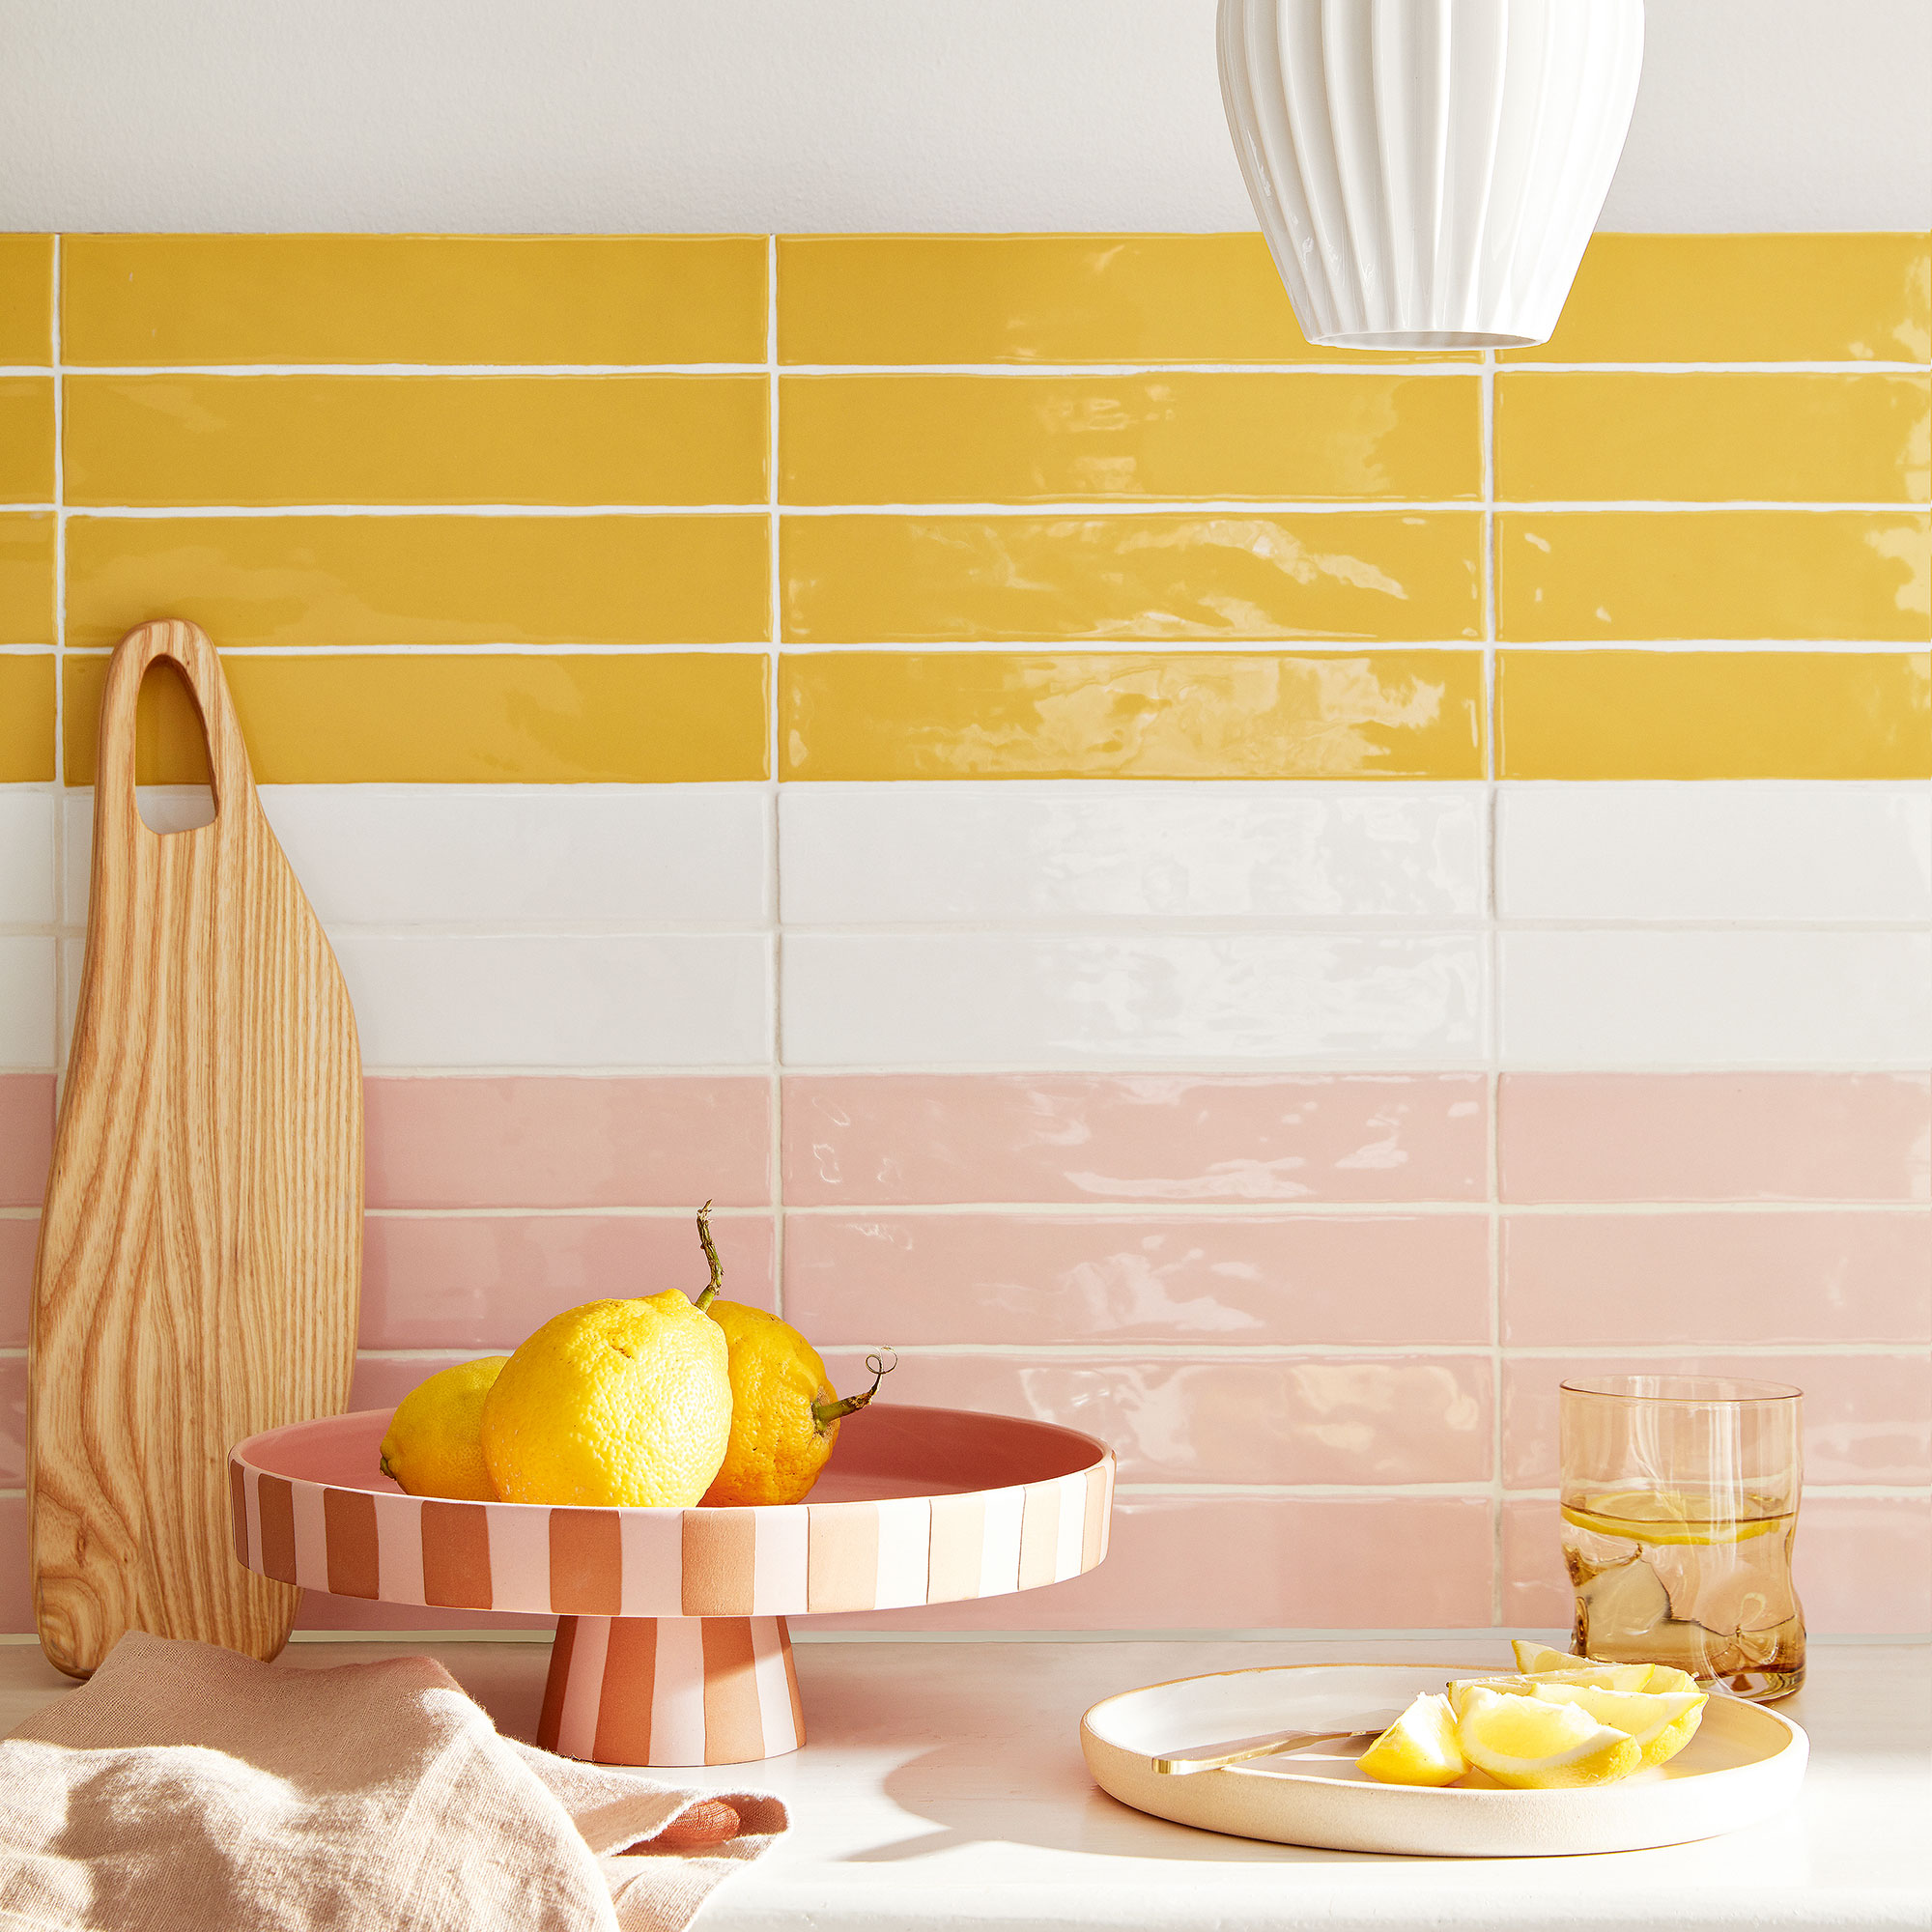 Kitchen tile ideas to add style and personality to your walls ...